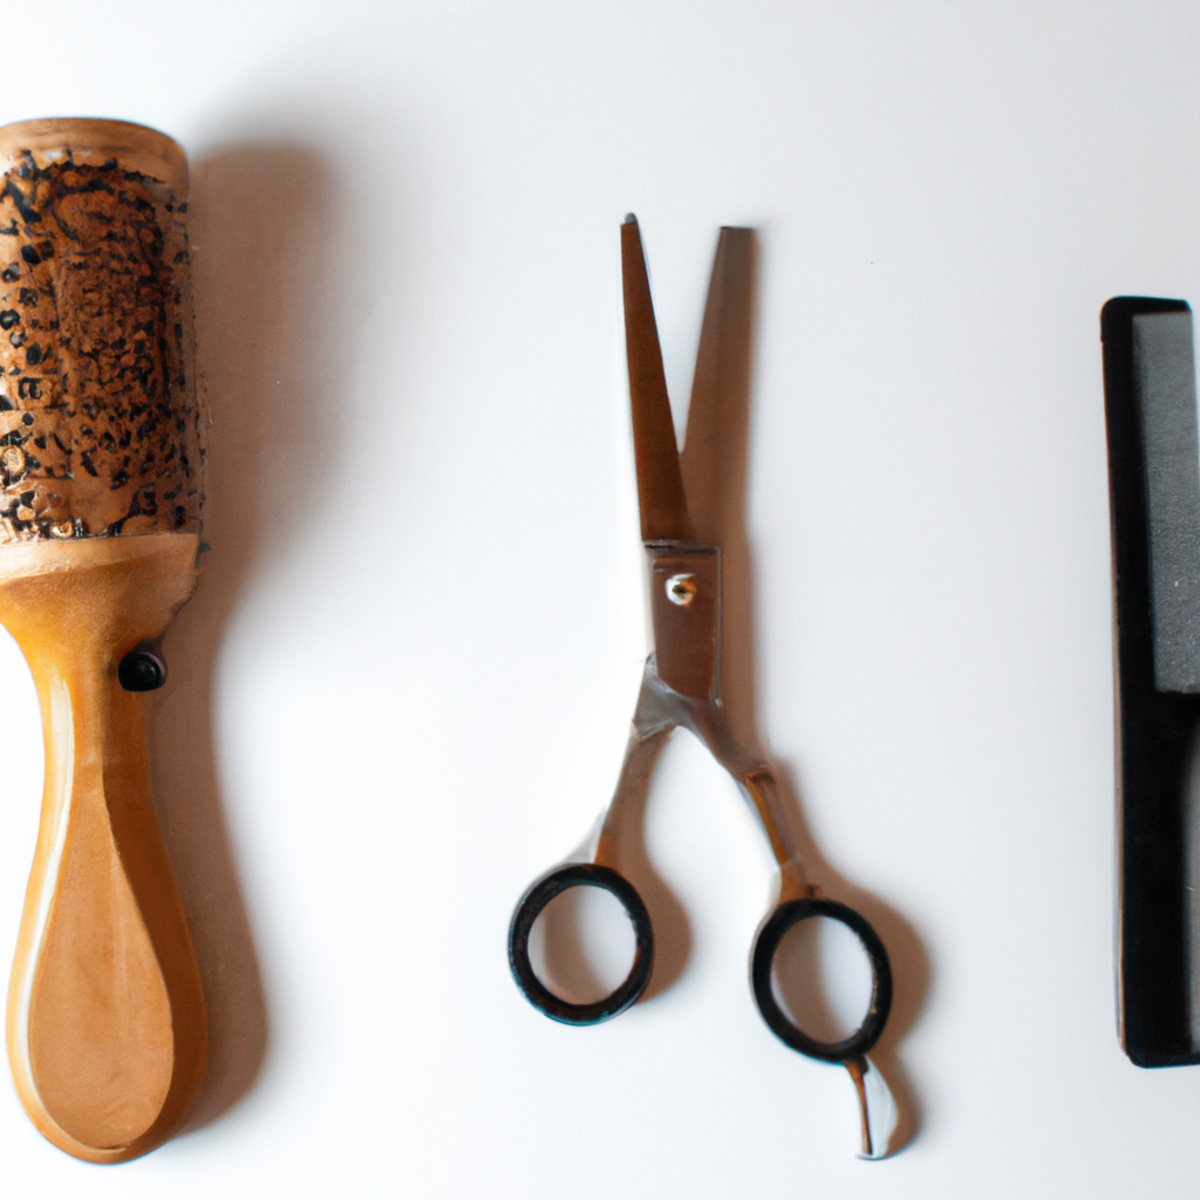 Professional hair care tools and products for men. Comb, scissors, clipper, and styling product on white background.